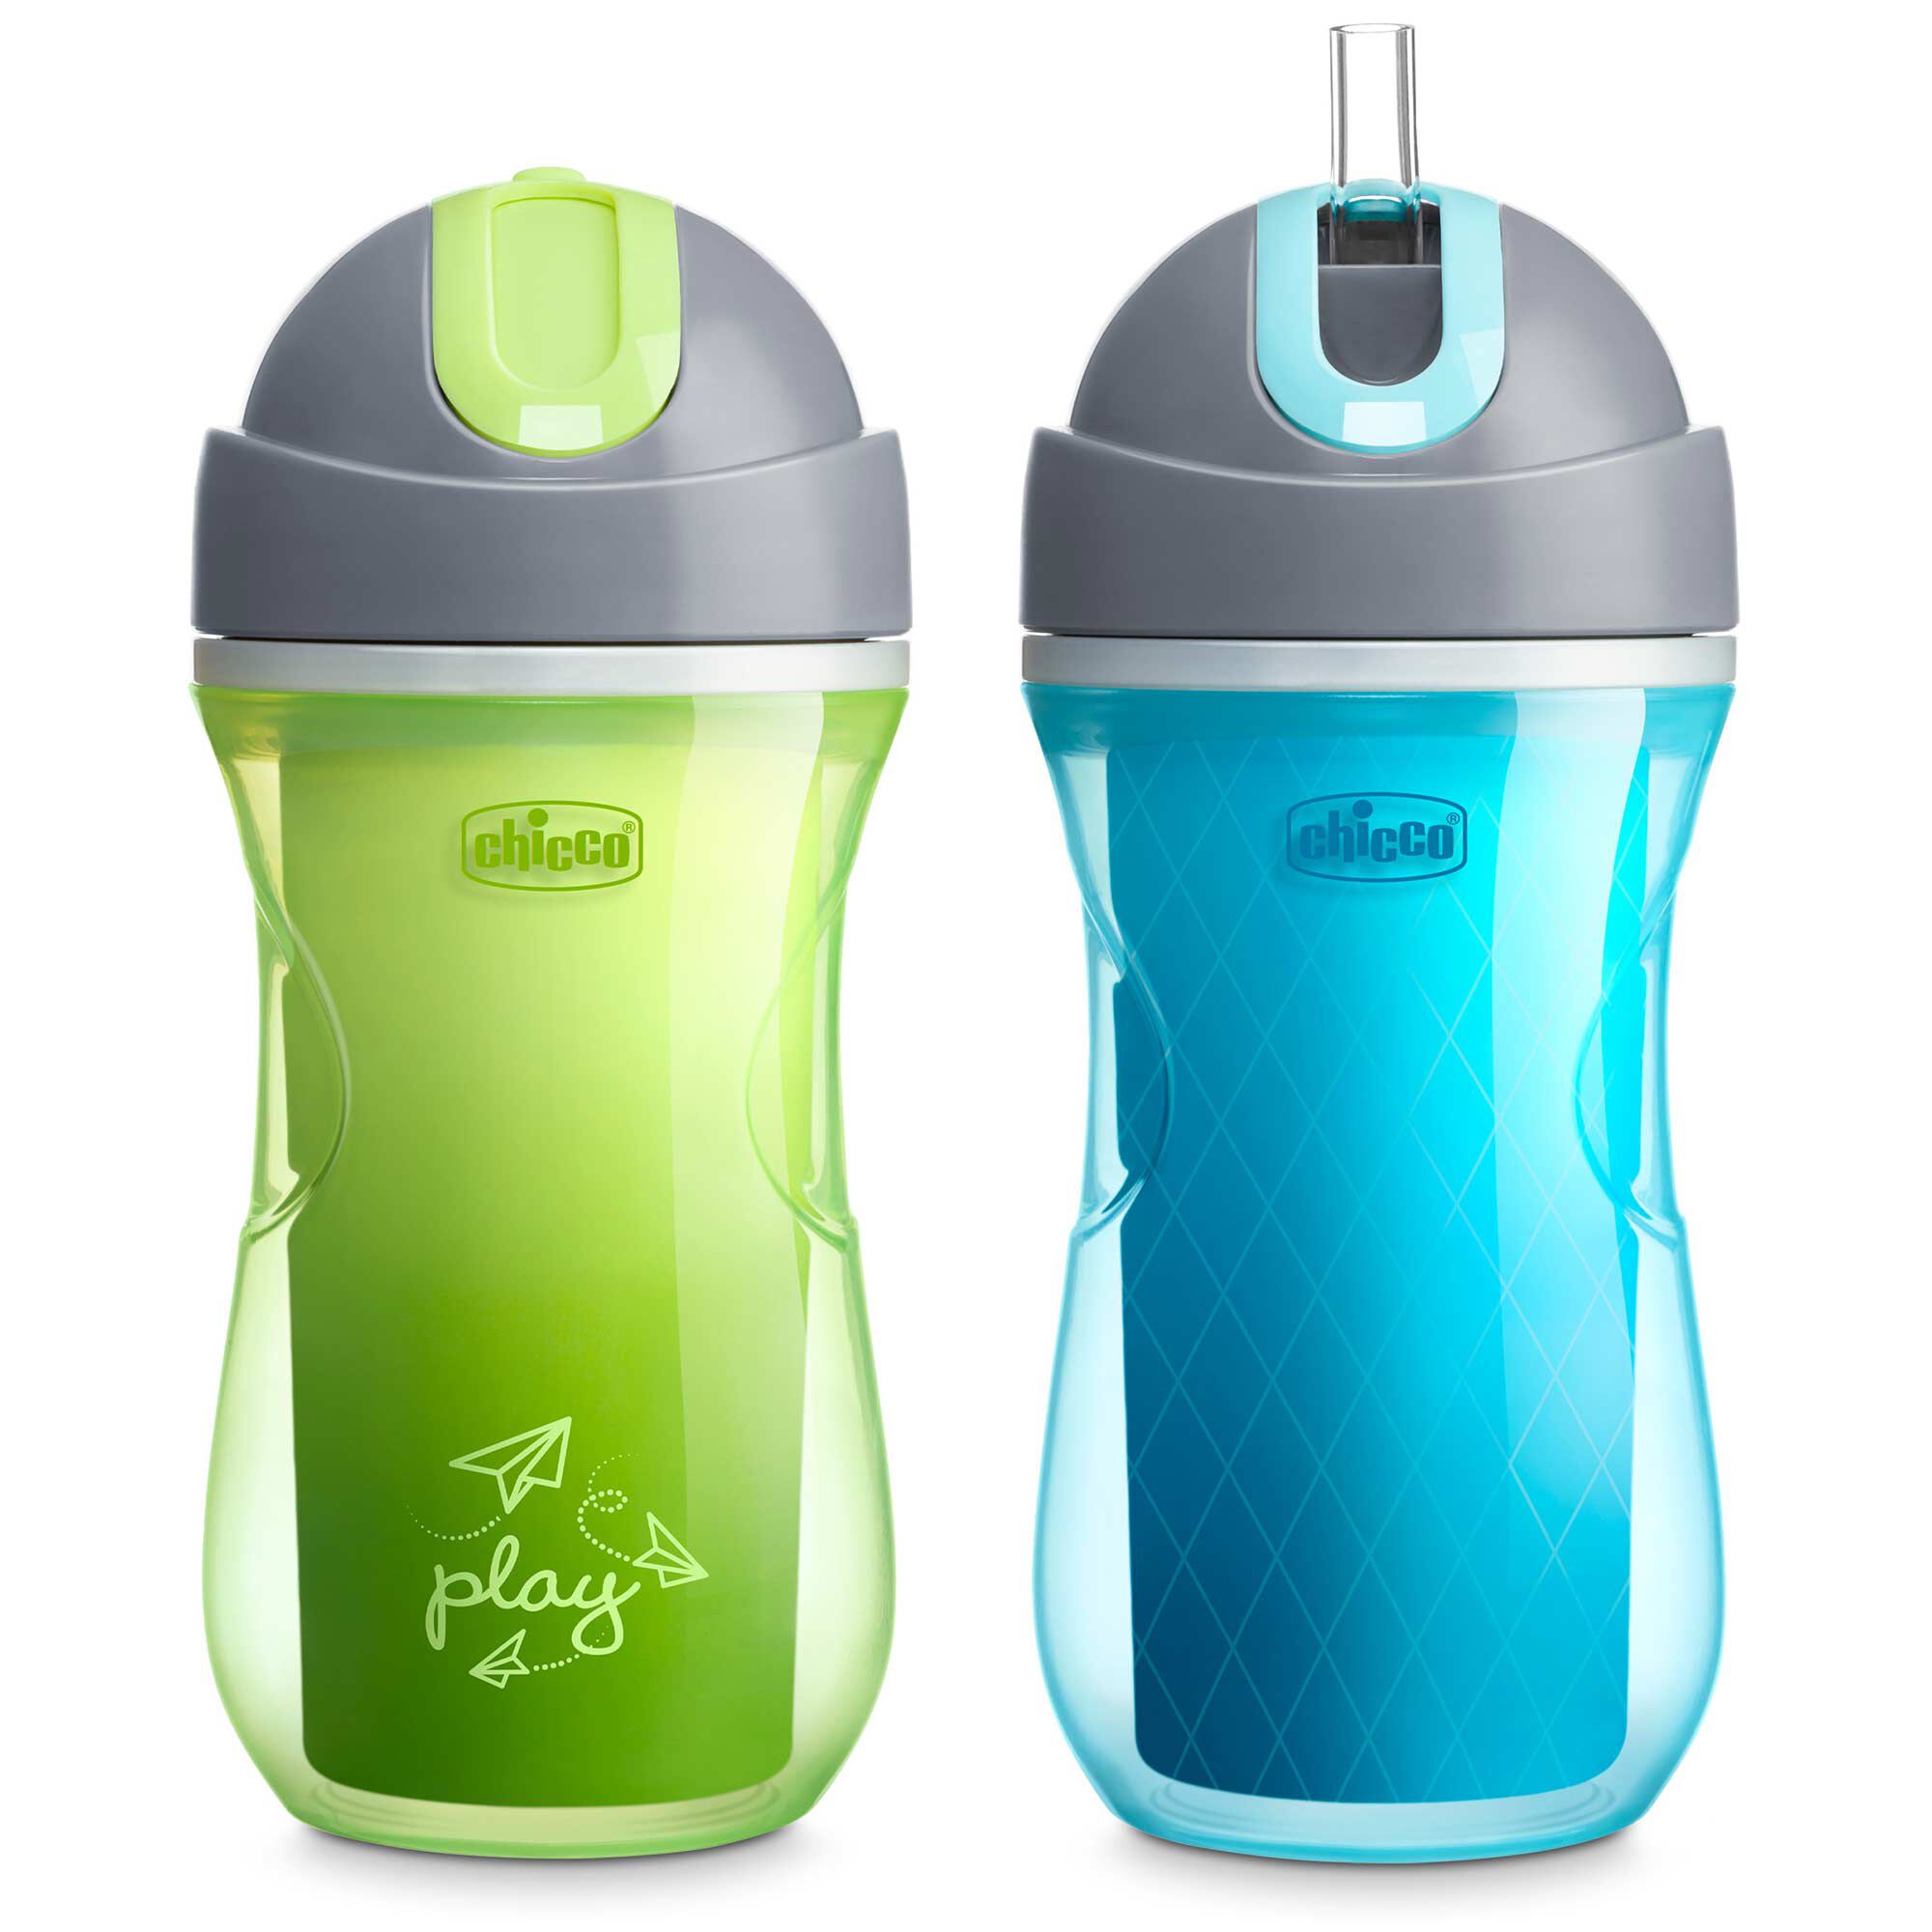 Design Your Own Sippy Cup with Straw